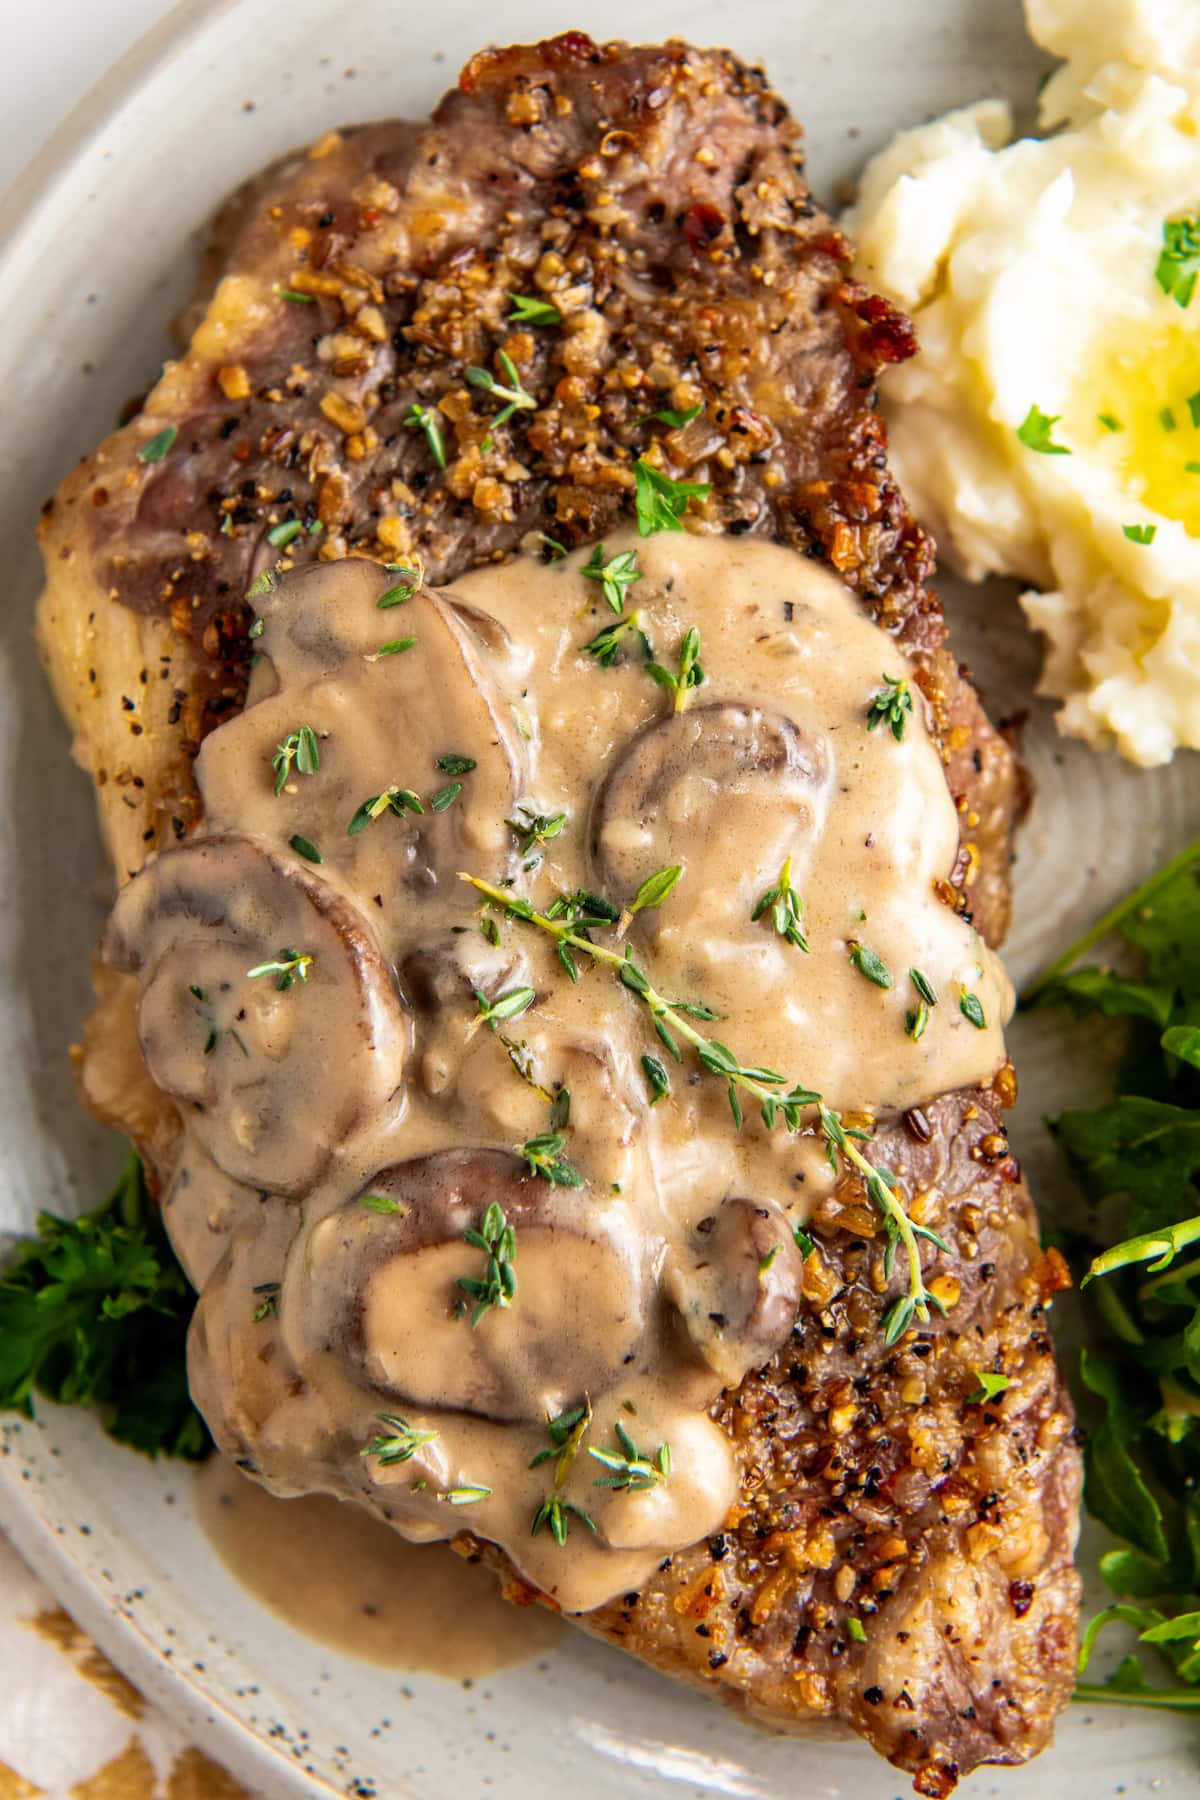 Steak with mushroom sauce on top on a plate with a side of potatoes.